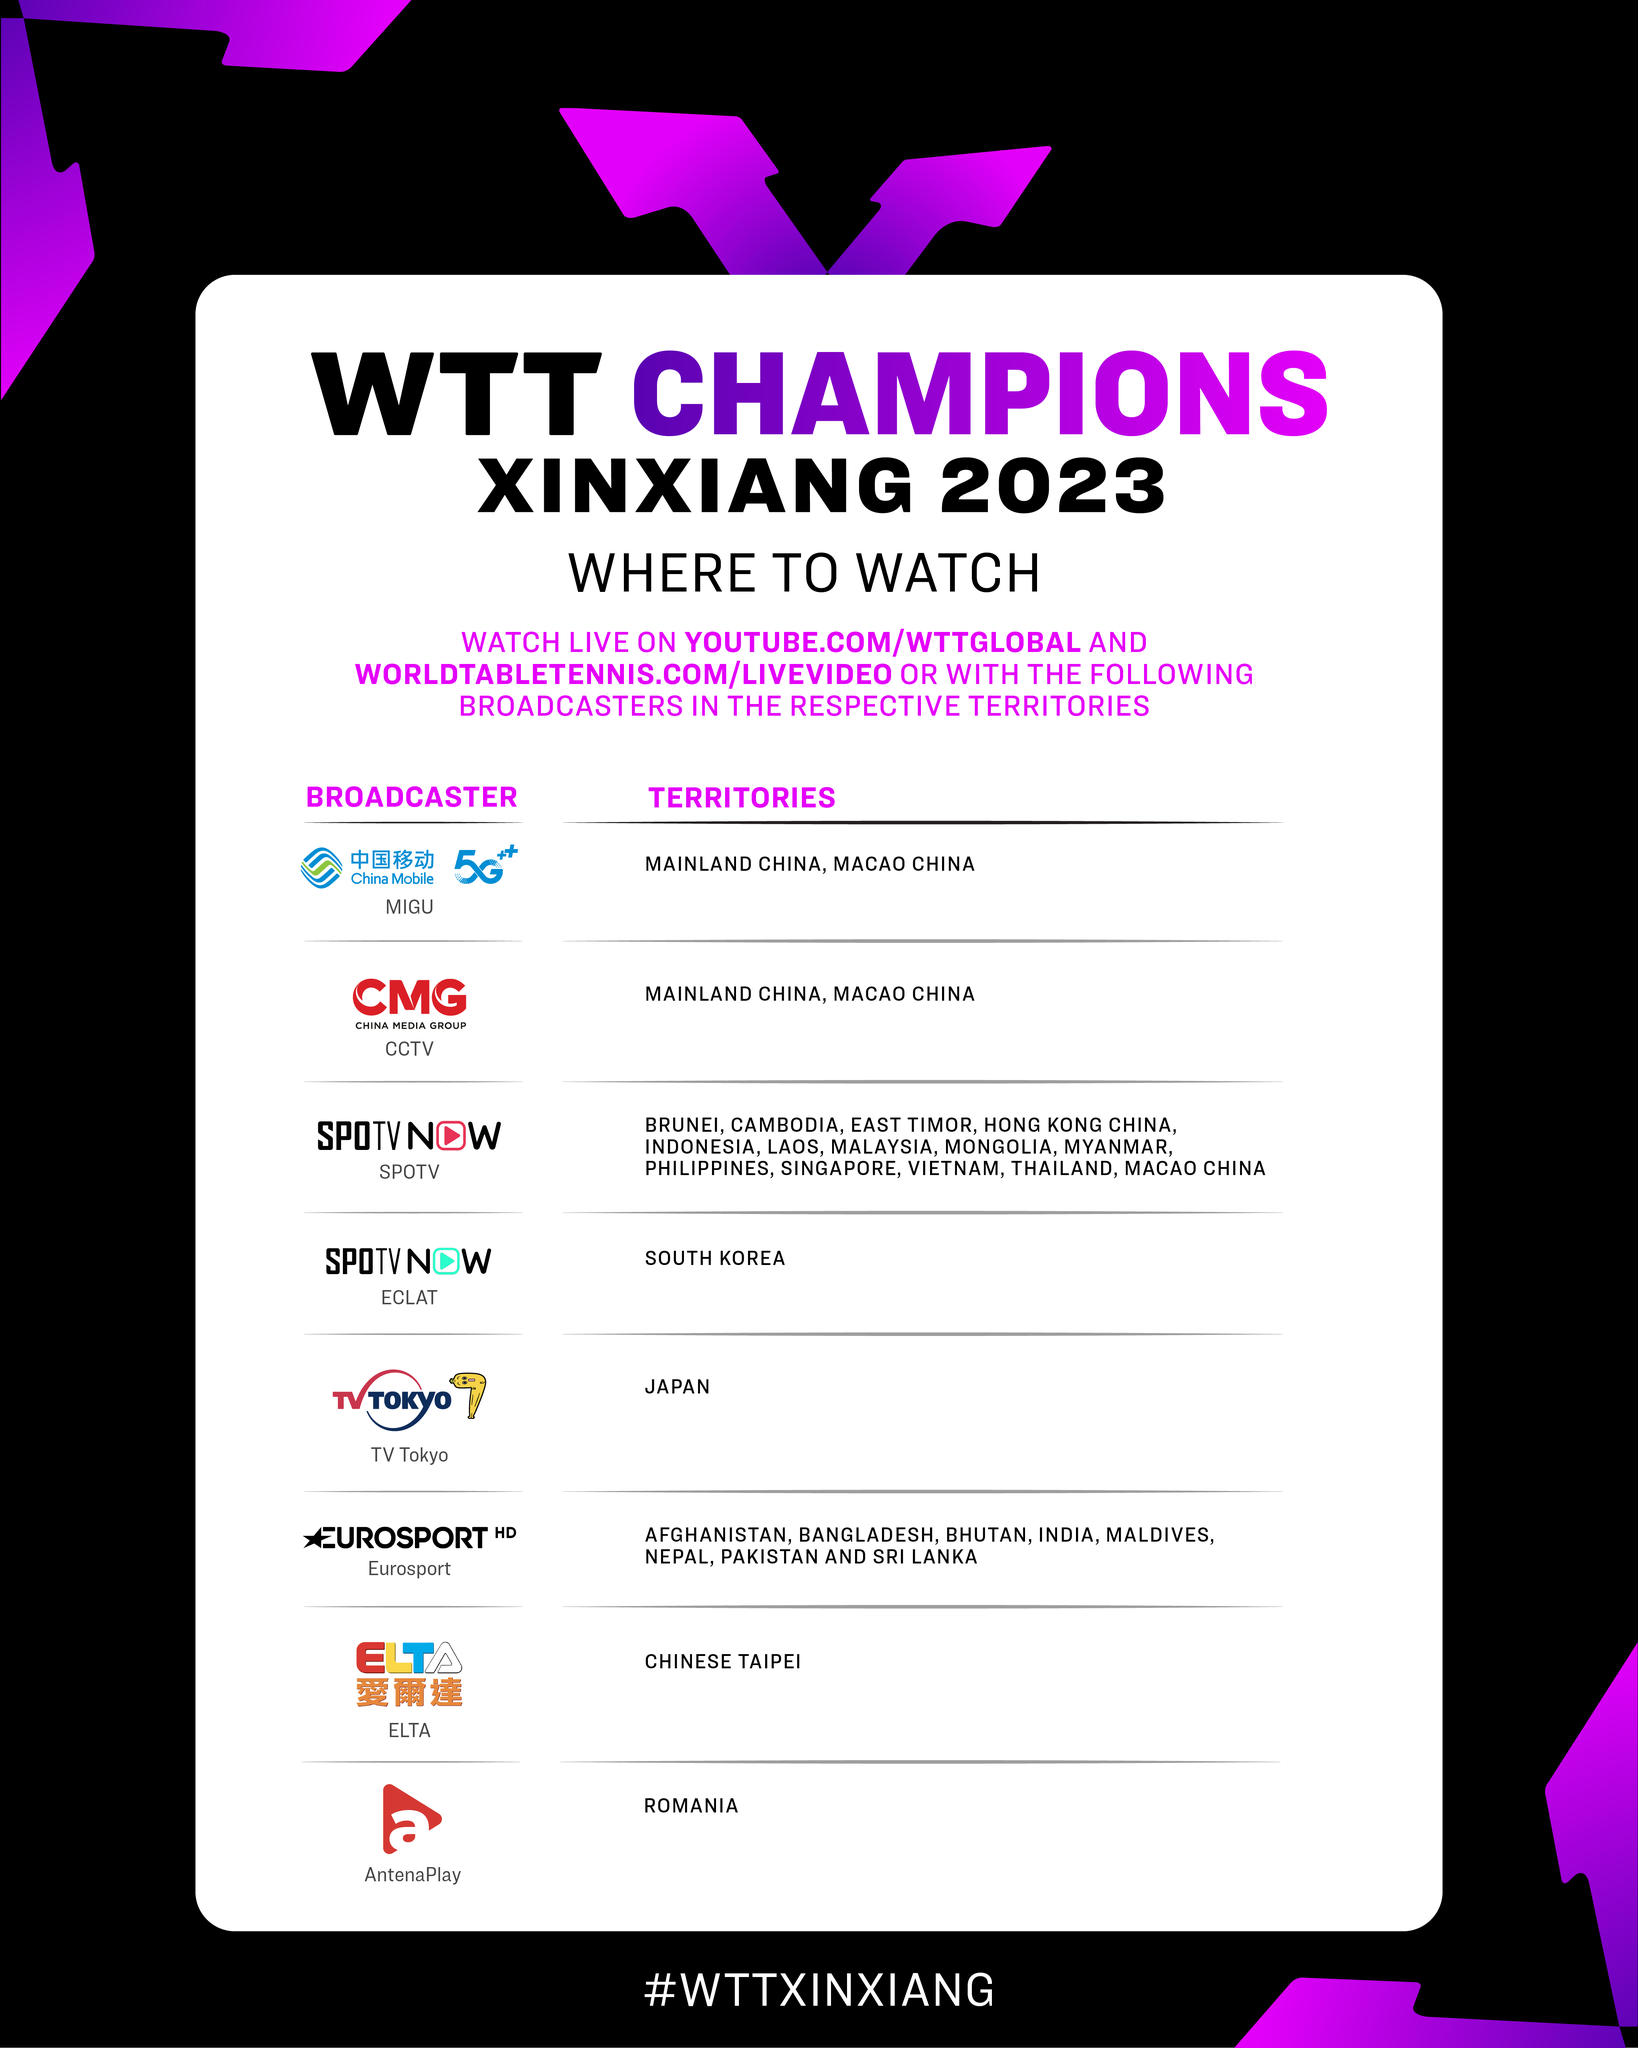 image  1 Wondering where to find your fix of the upcoming #WTTChampions Xinxiang action